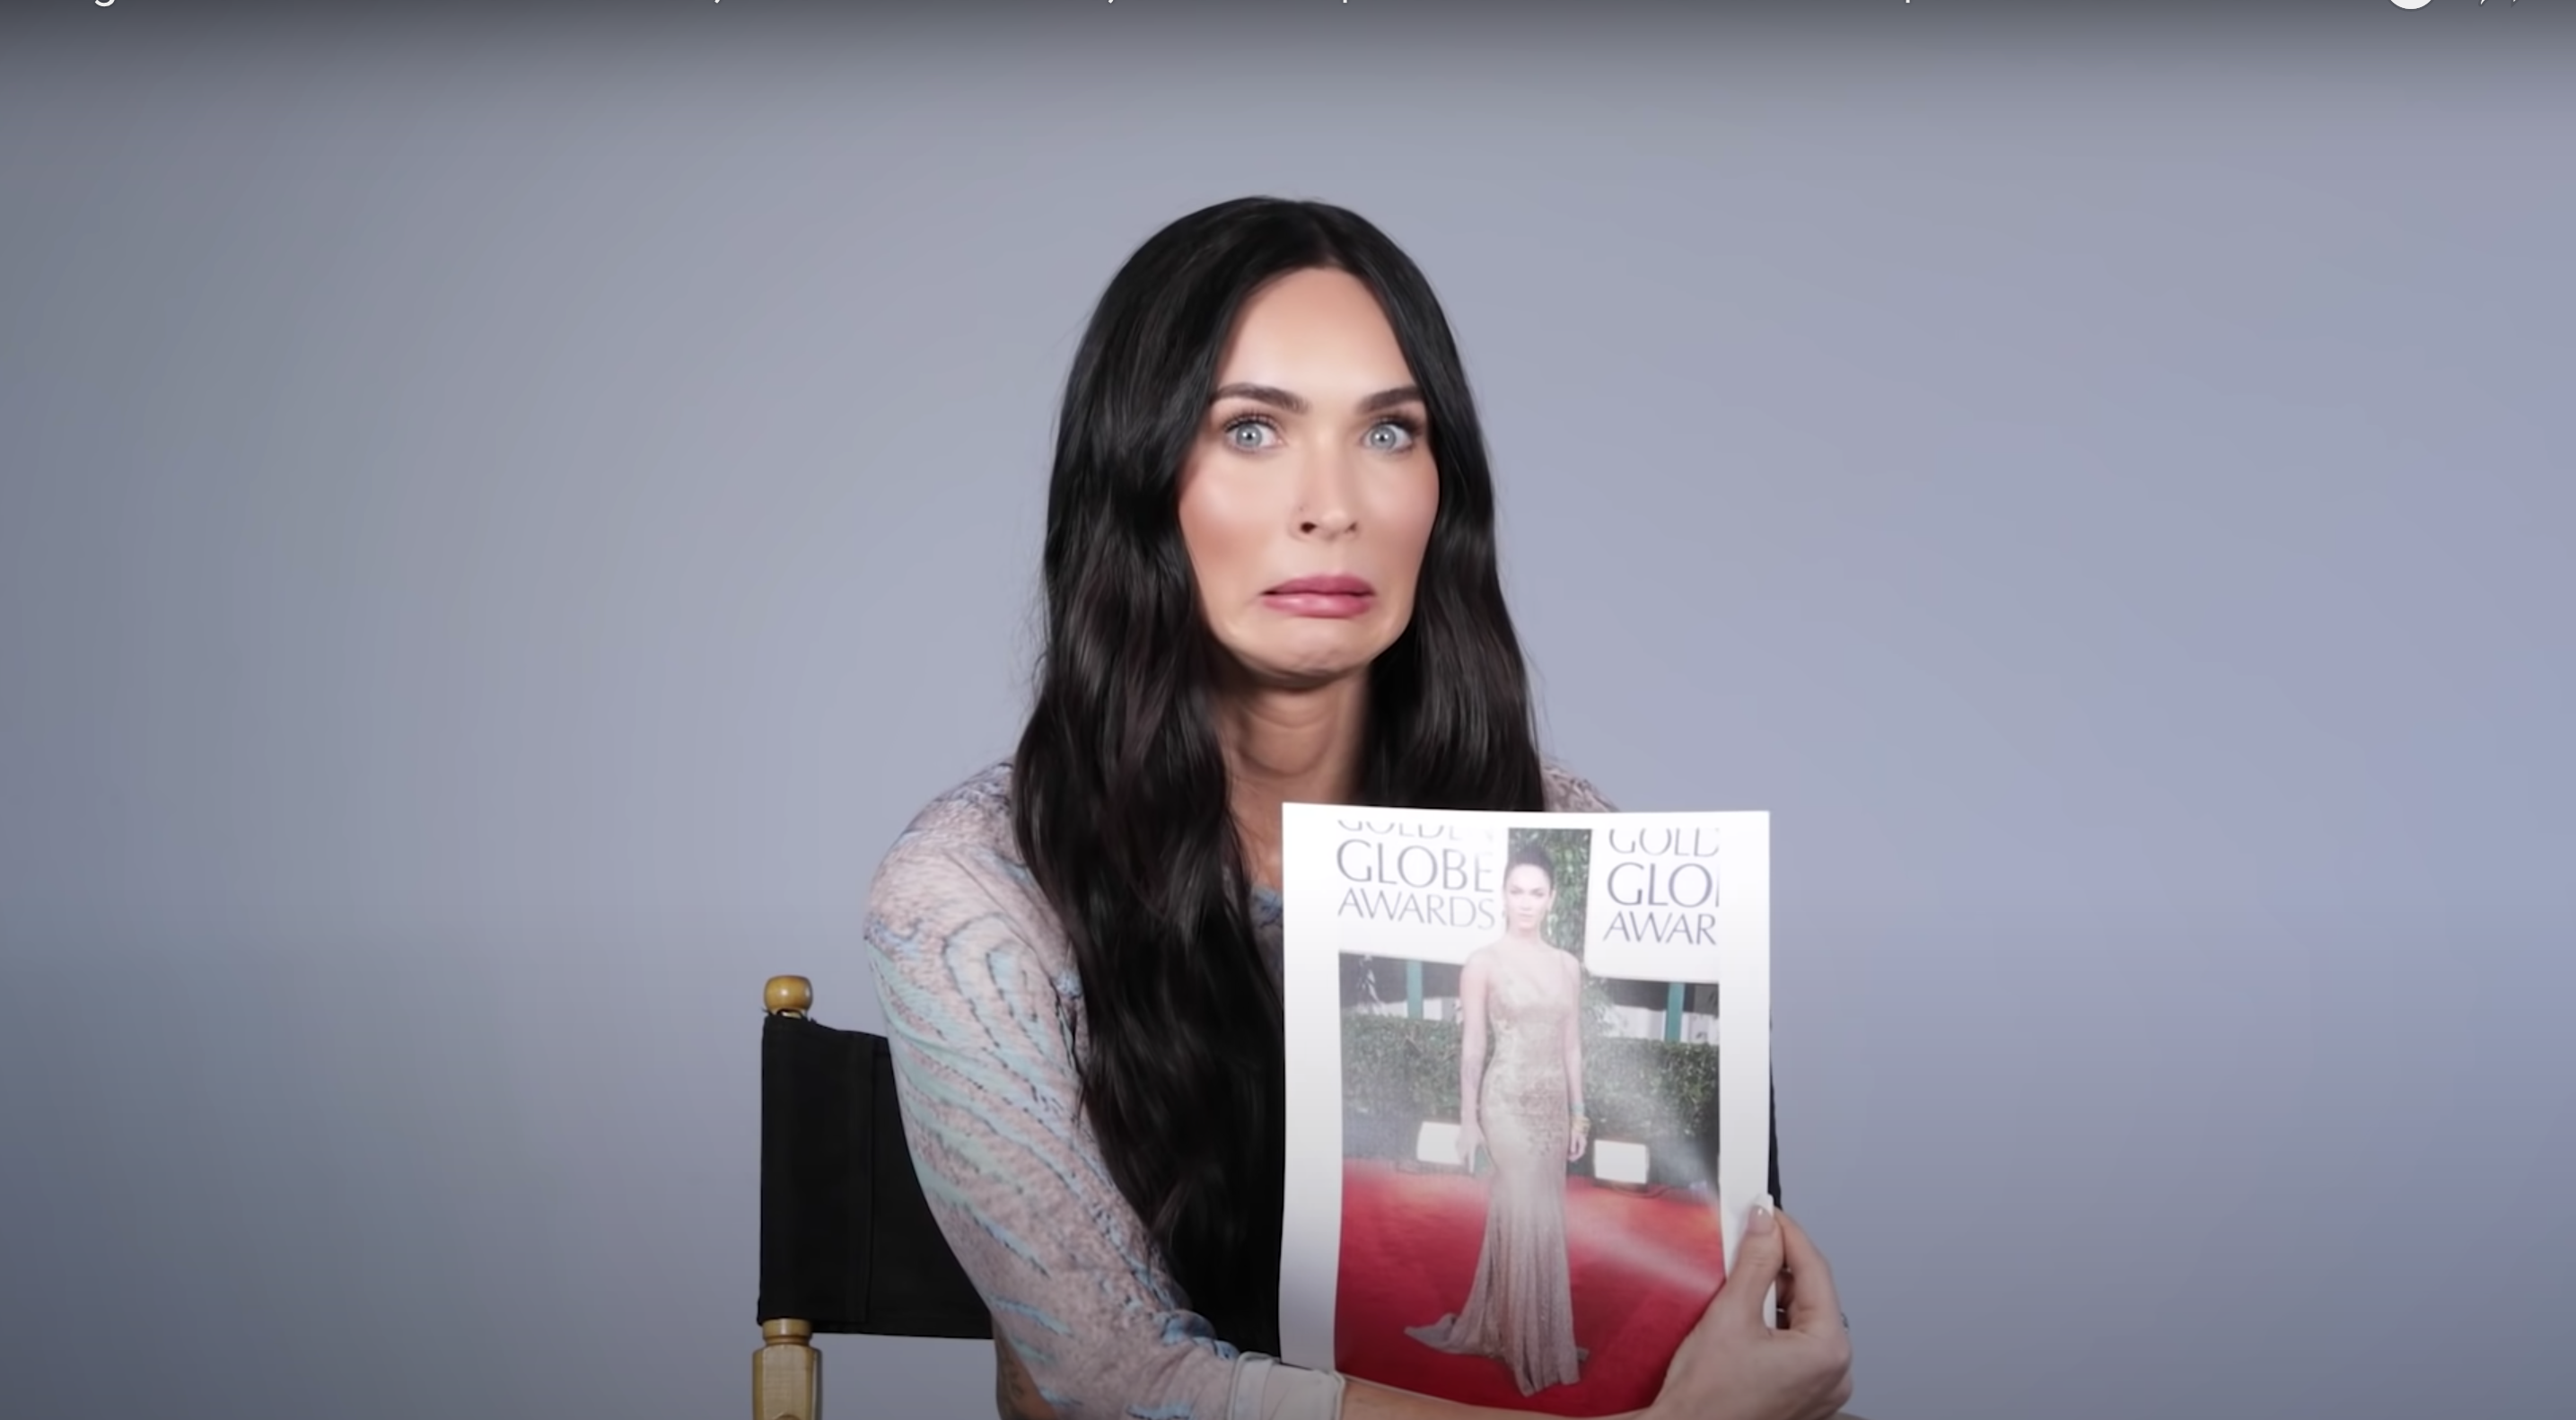 Megan Fox reacting to a photo of herself